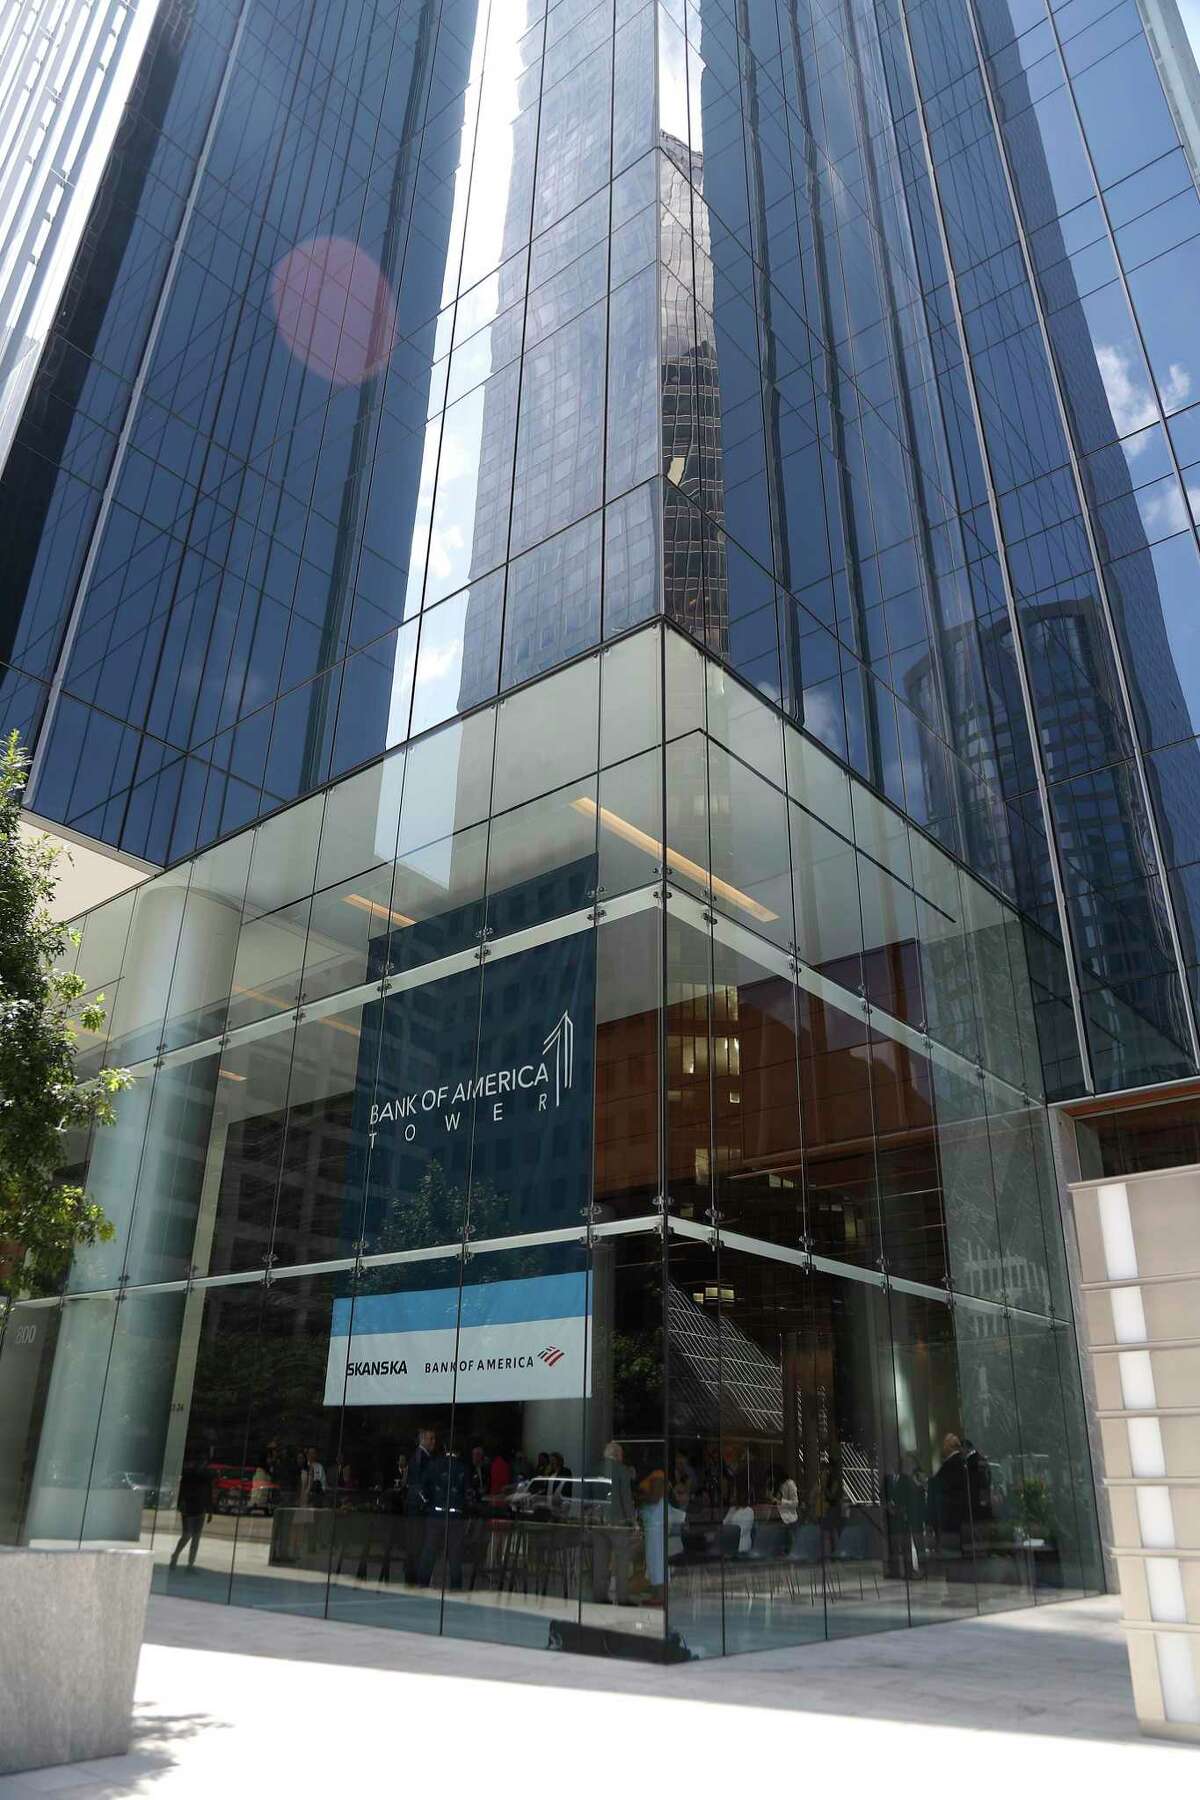 Exterior of the new Bank of America Tower, Wednesday, May 22, 2019. The 35-story office building was developed by Skanska in downtown Houston.